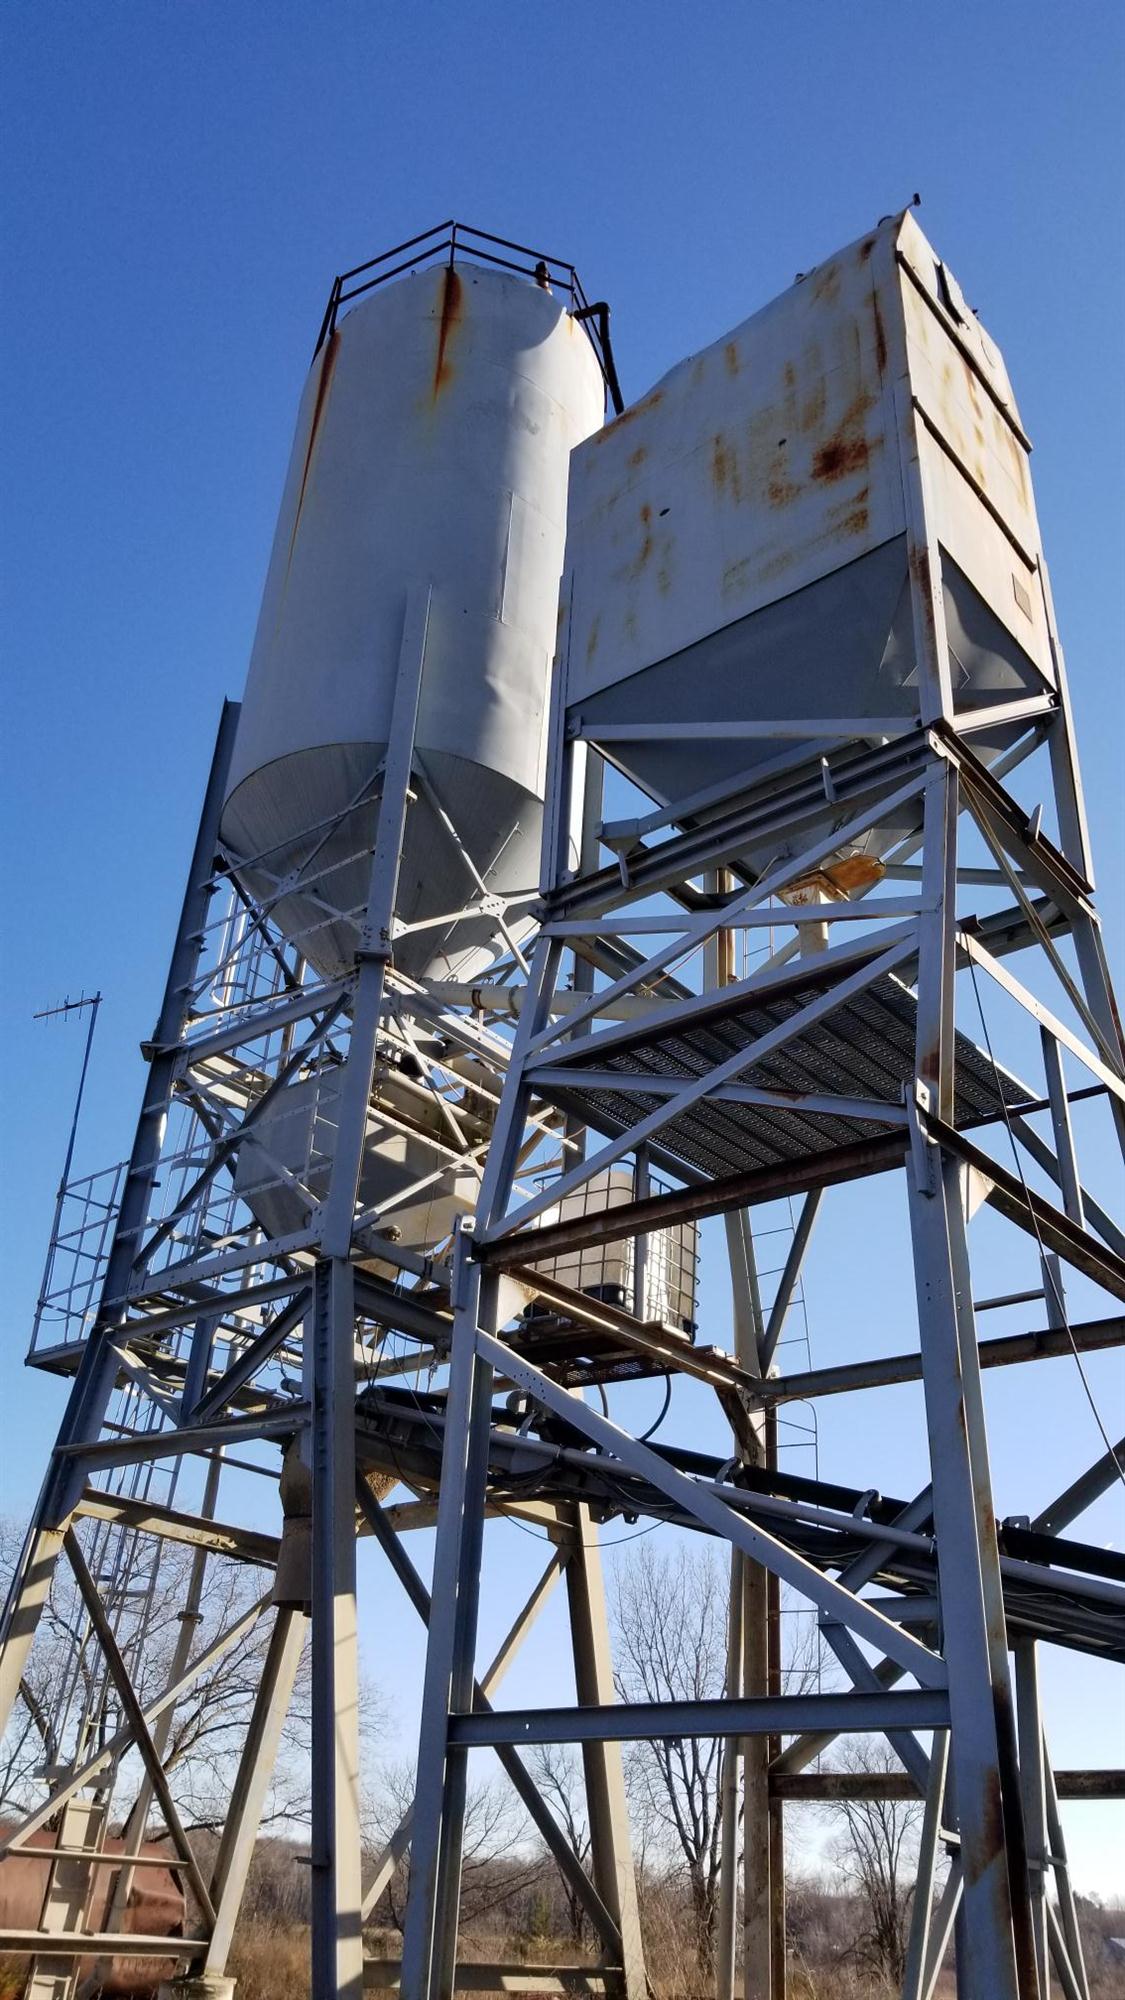 Used 350 bbl cement silo for sale